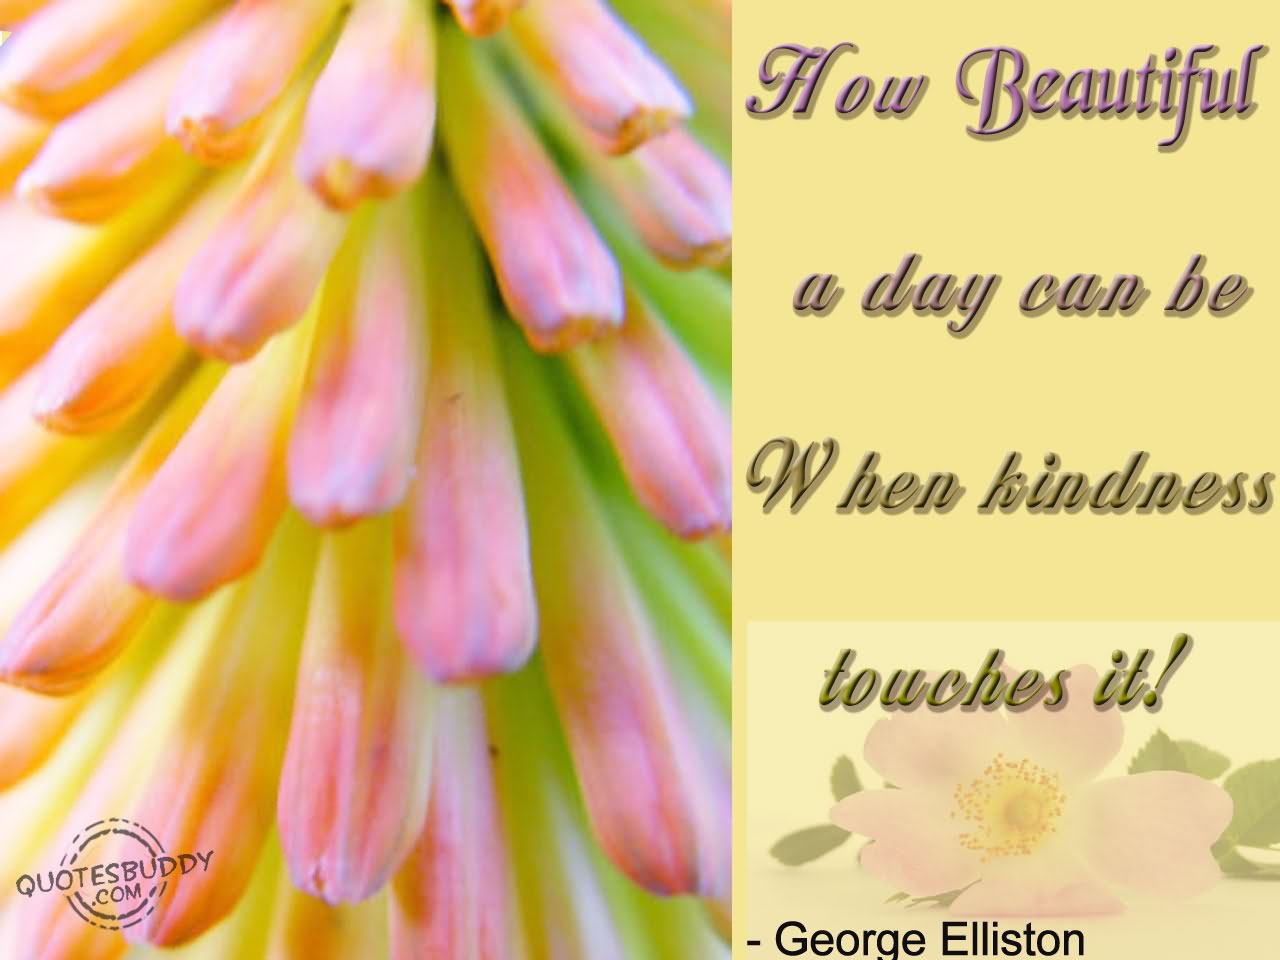 How beautiful a day can be when kindness touches it  - George Elliston